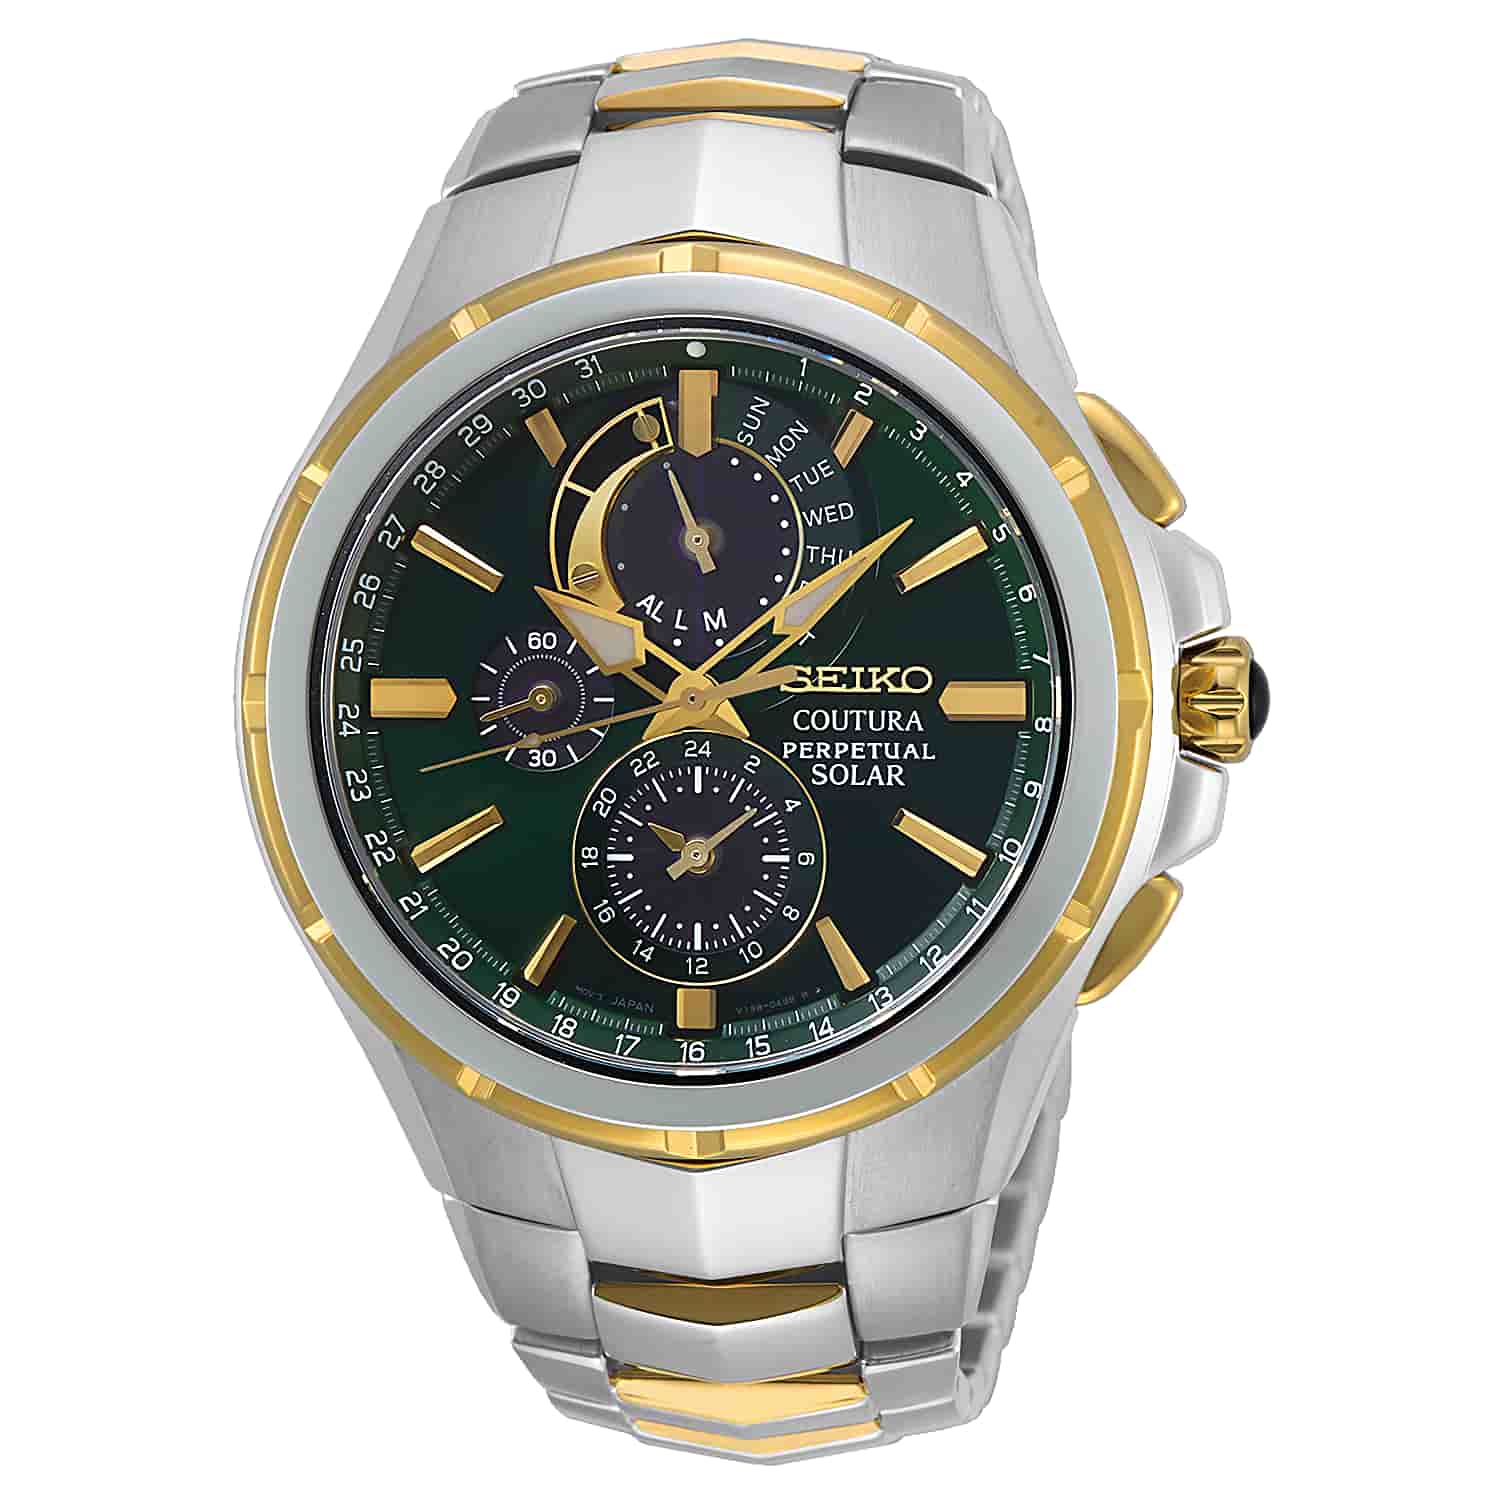 SSC764P1 SEIKO Coutura Perpetual Solar Watch. This is the  SEIKO SSC764P1 Coutura Perpetual Solar WatchOxipay is simply the easier way to pay - use Oxipay and well spread your payment up to a maximum of $1500 over either 4 or 8 easy instalments. No i @chr